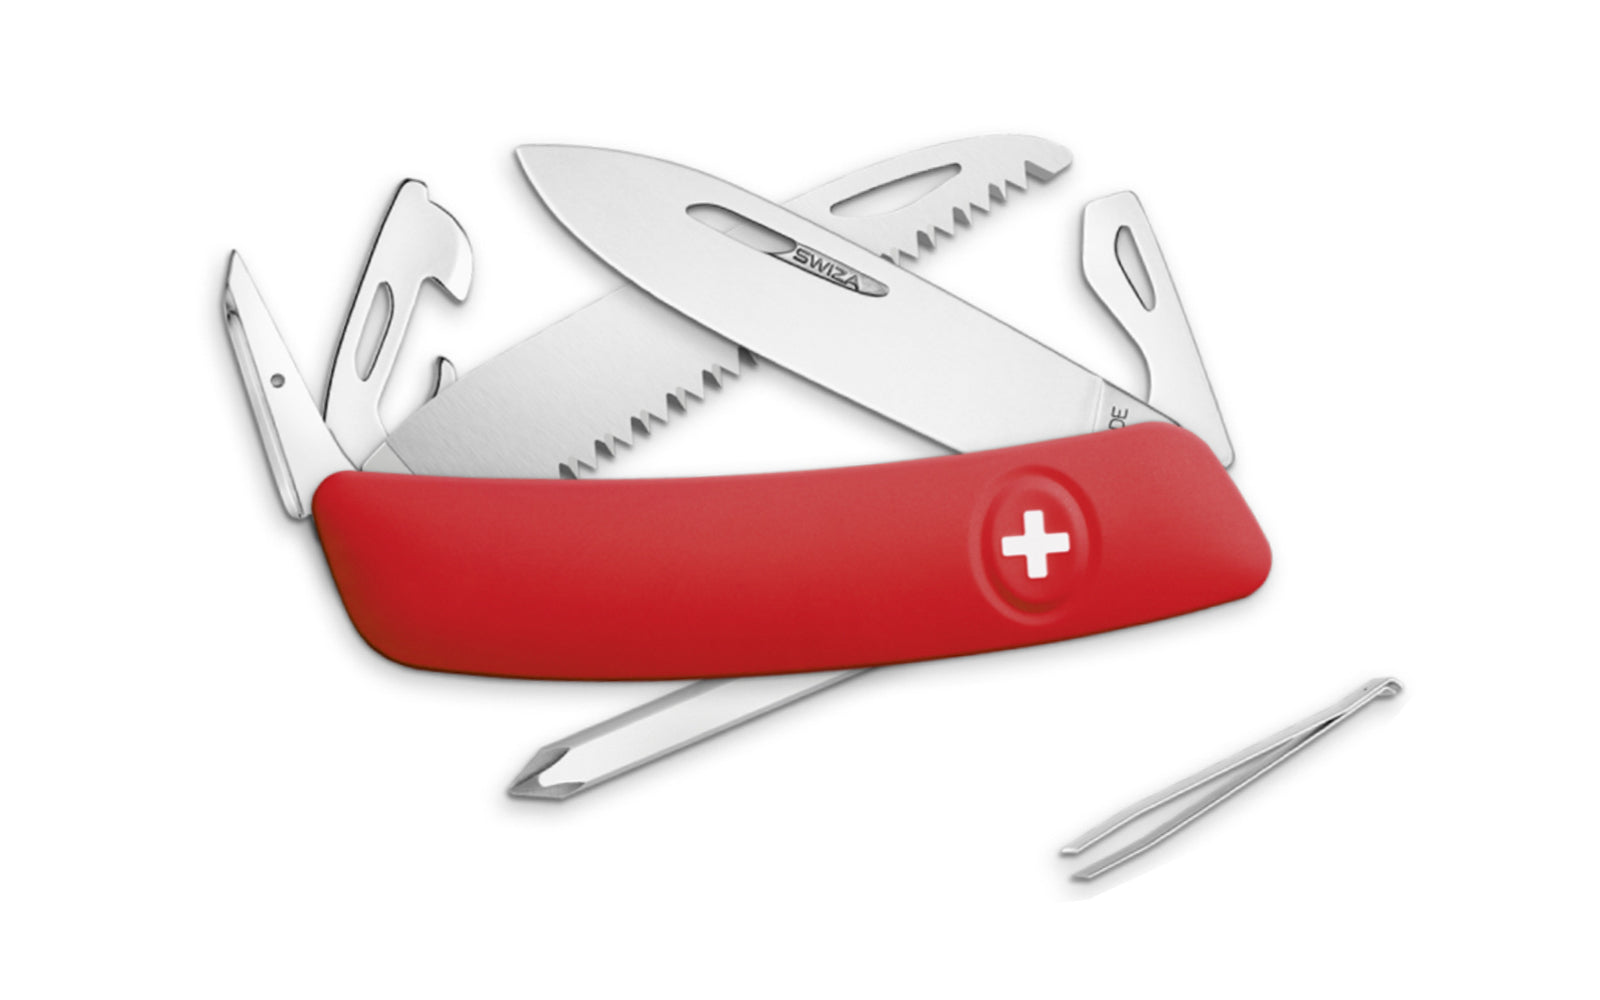 Swiza D06 Red Swiss Multi-Tool Knife. 3-3/4" closed length. Includes 75 mm blade, saw blade, blade lock, reamer/punch, sewing awl, bottle opener, #3 slotted screwdriver, #1 slotted screwdriver, #1 phillips screwdriver, wire bender, can opener, tweezers. Swiss Army Style Knife. Made in Switzerland.